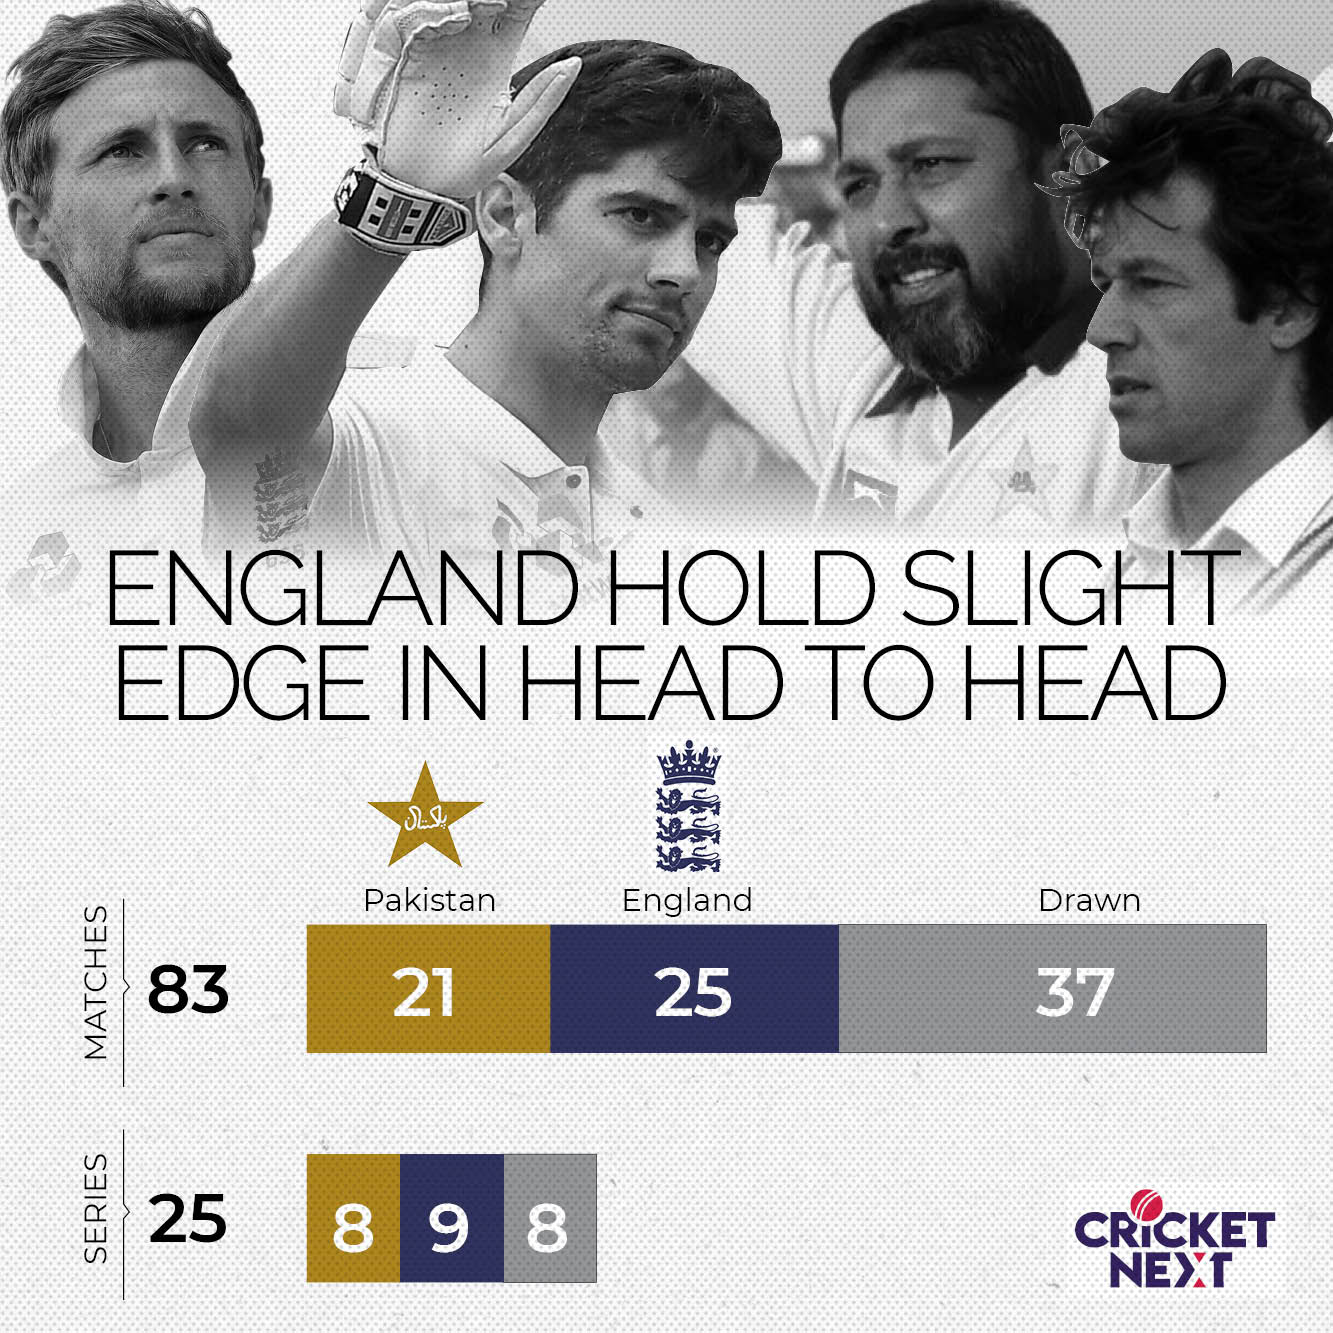 England S Domination Pakistan S Successive Wins Recent Battles A Summary Of Eng Vs Pak In Test Cricket